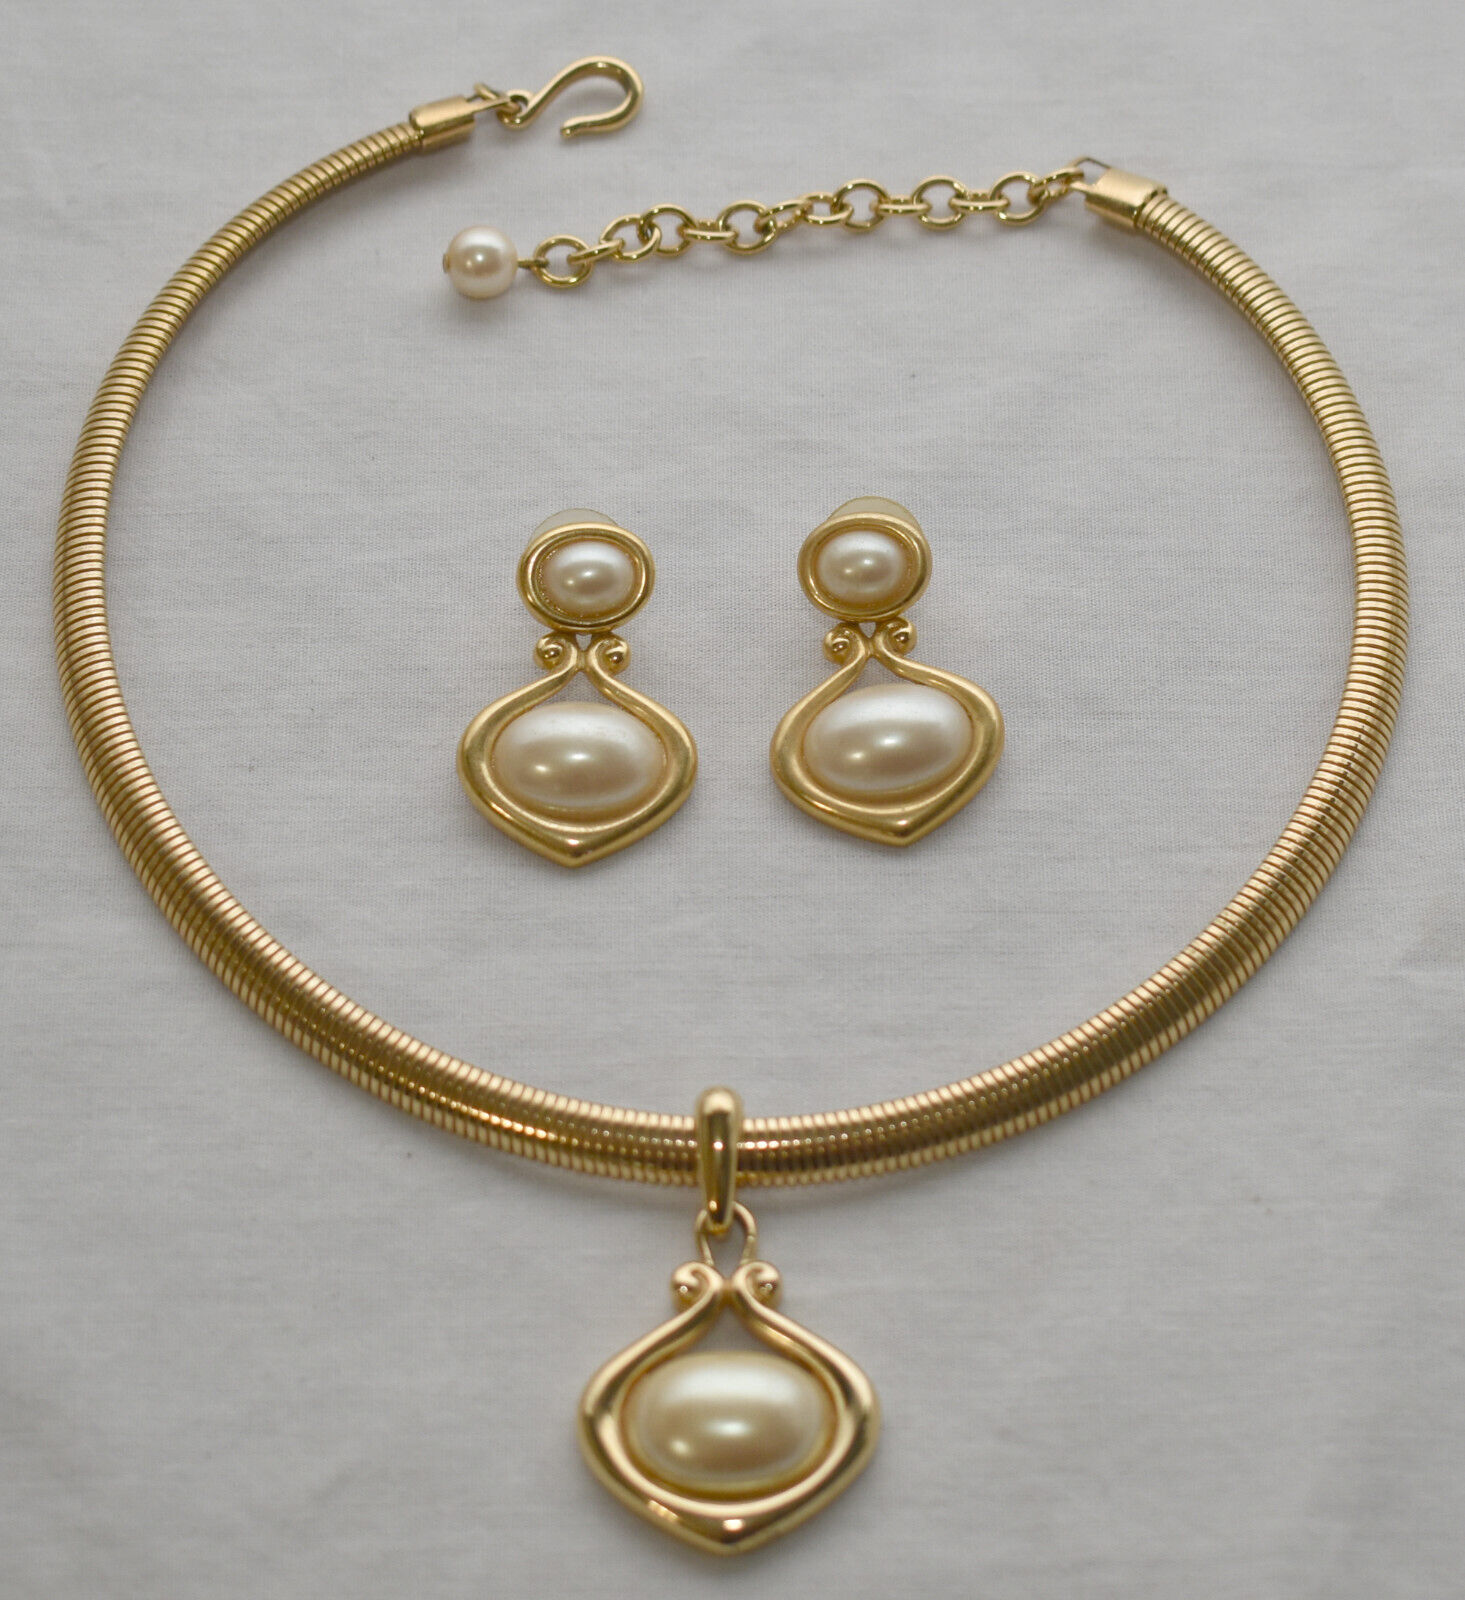 Primary image for Vtg Gold Choker Necklace w Pearl Pendant Snake Chain & Matching Earrings 2PC Set